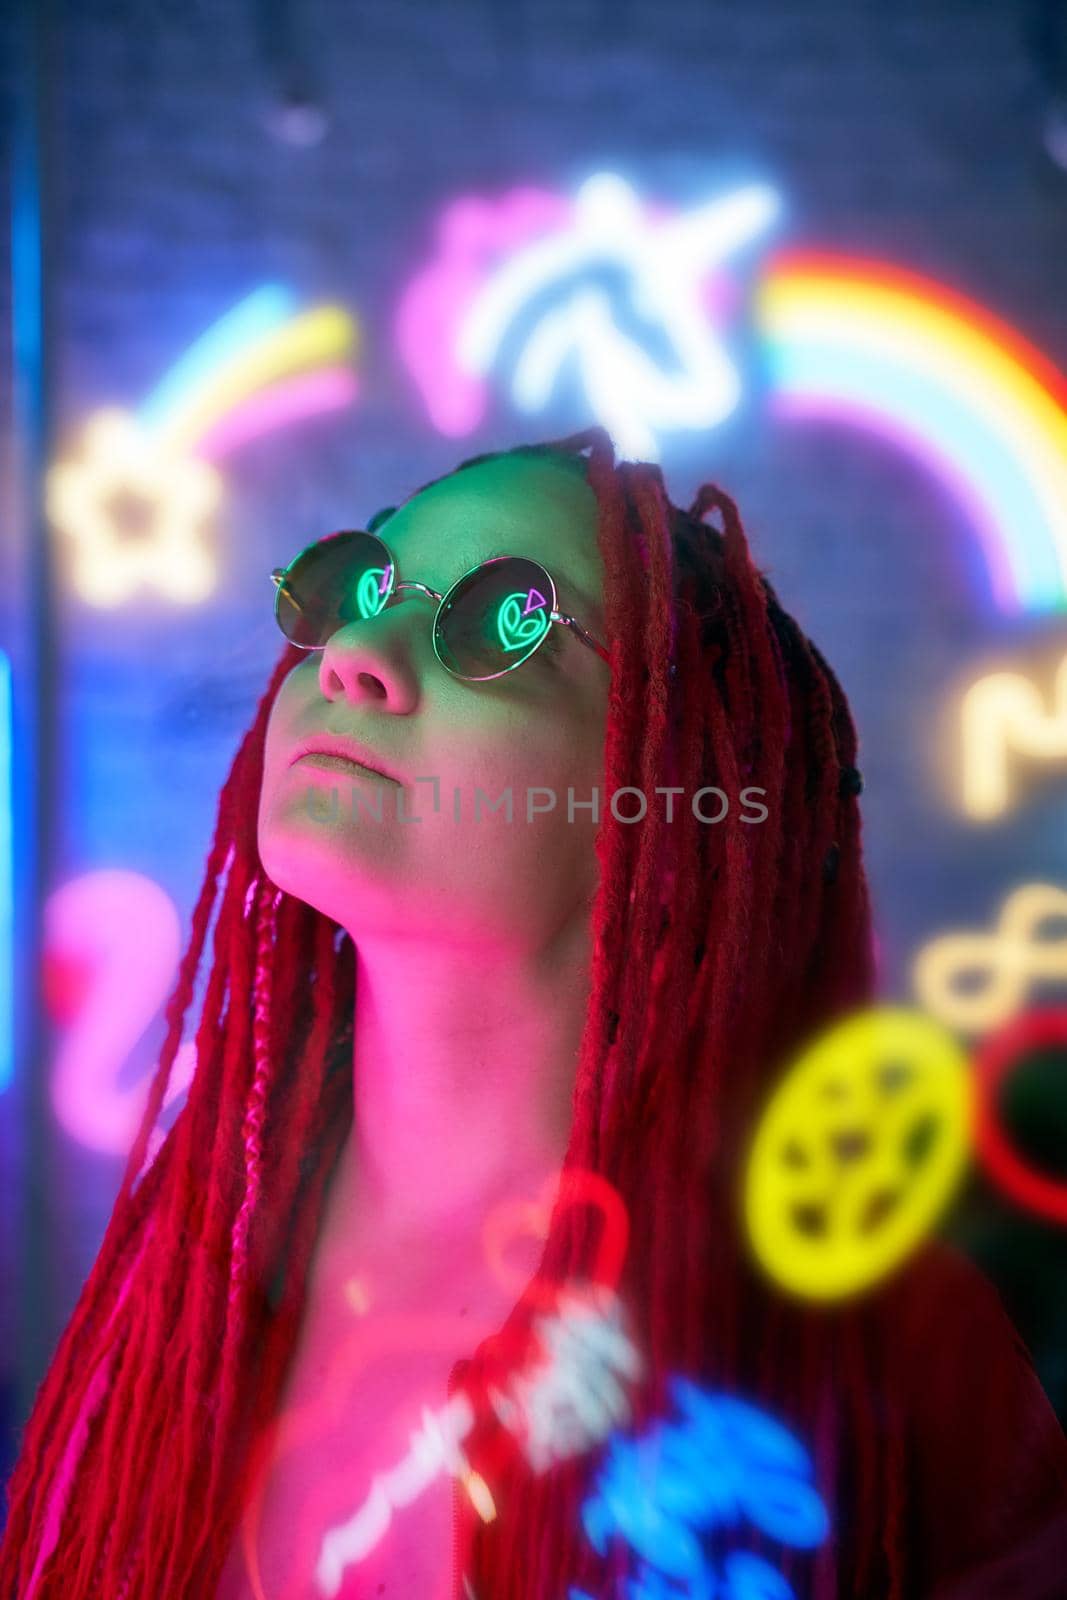 Girl in neon lights, beautiful woman in sunglasses, with pink hair, with dreadlocks pigtails by NataBene